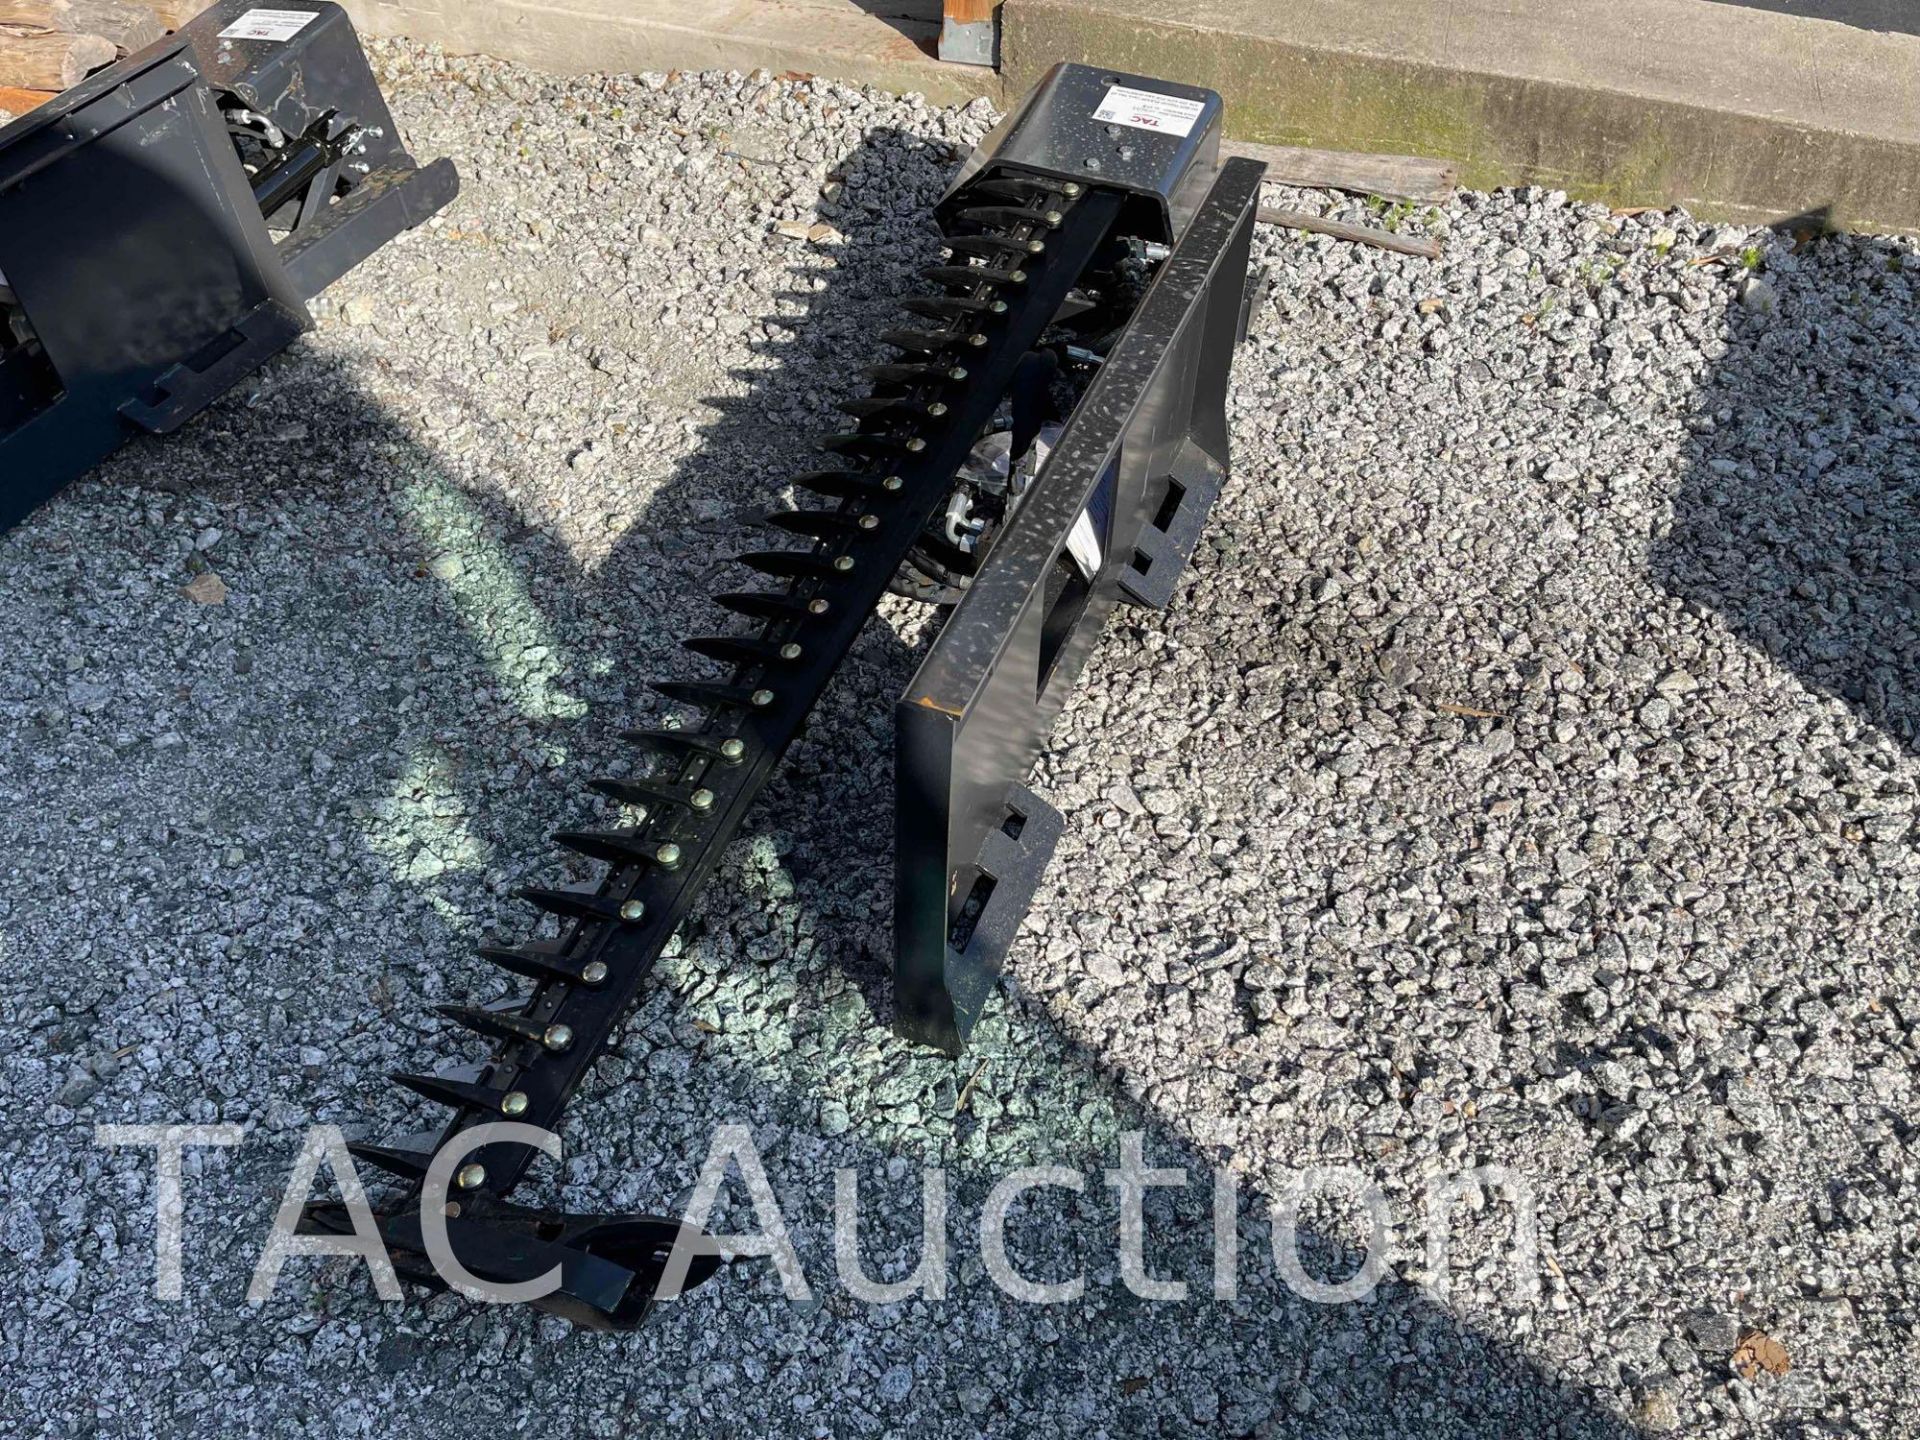 New 2023 Wolverine Skid Steer Sickle Bar Mower Attachment W/ In Cab Controller - Image 2 of 4